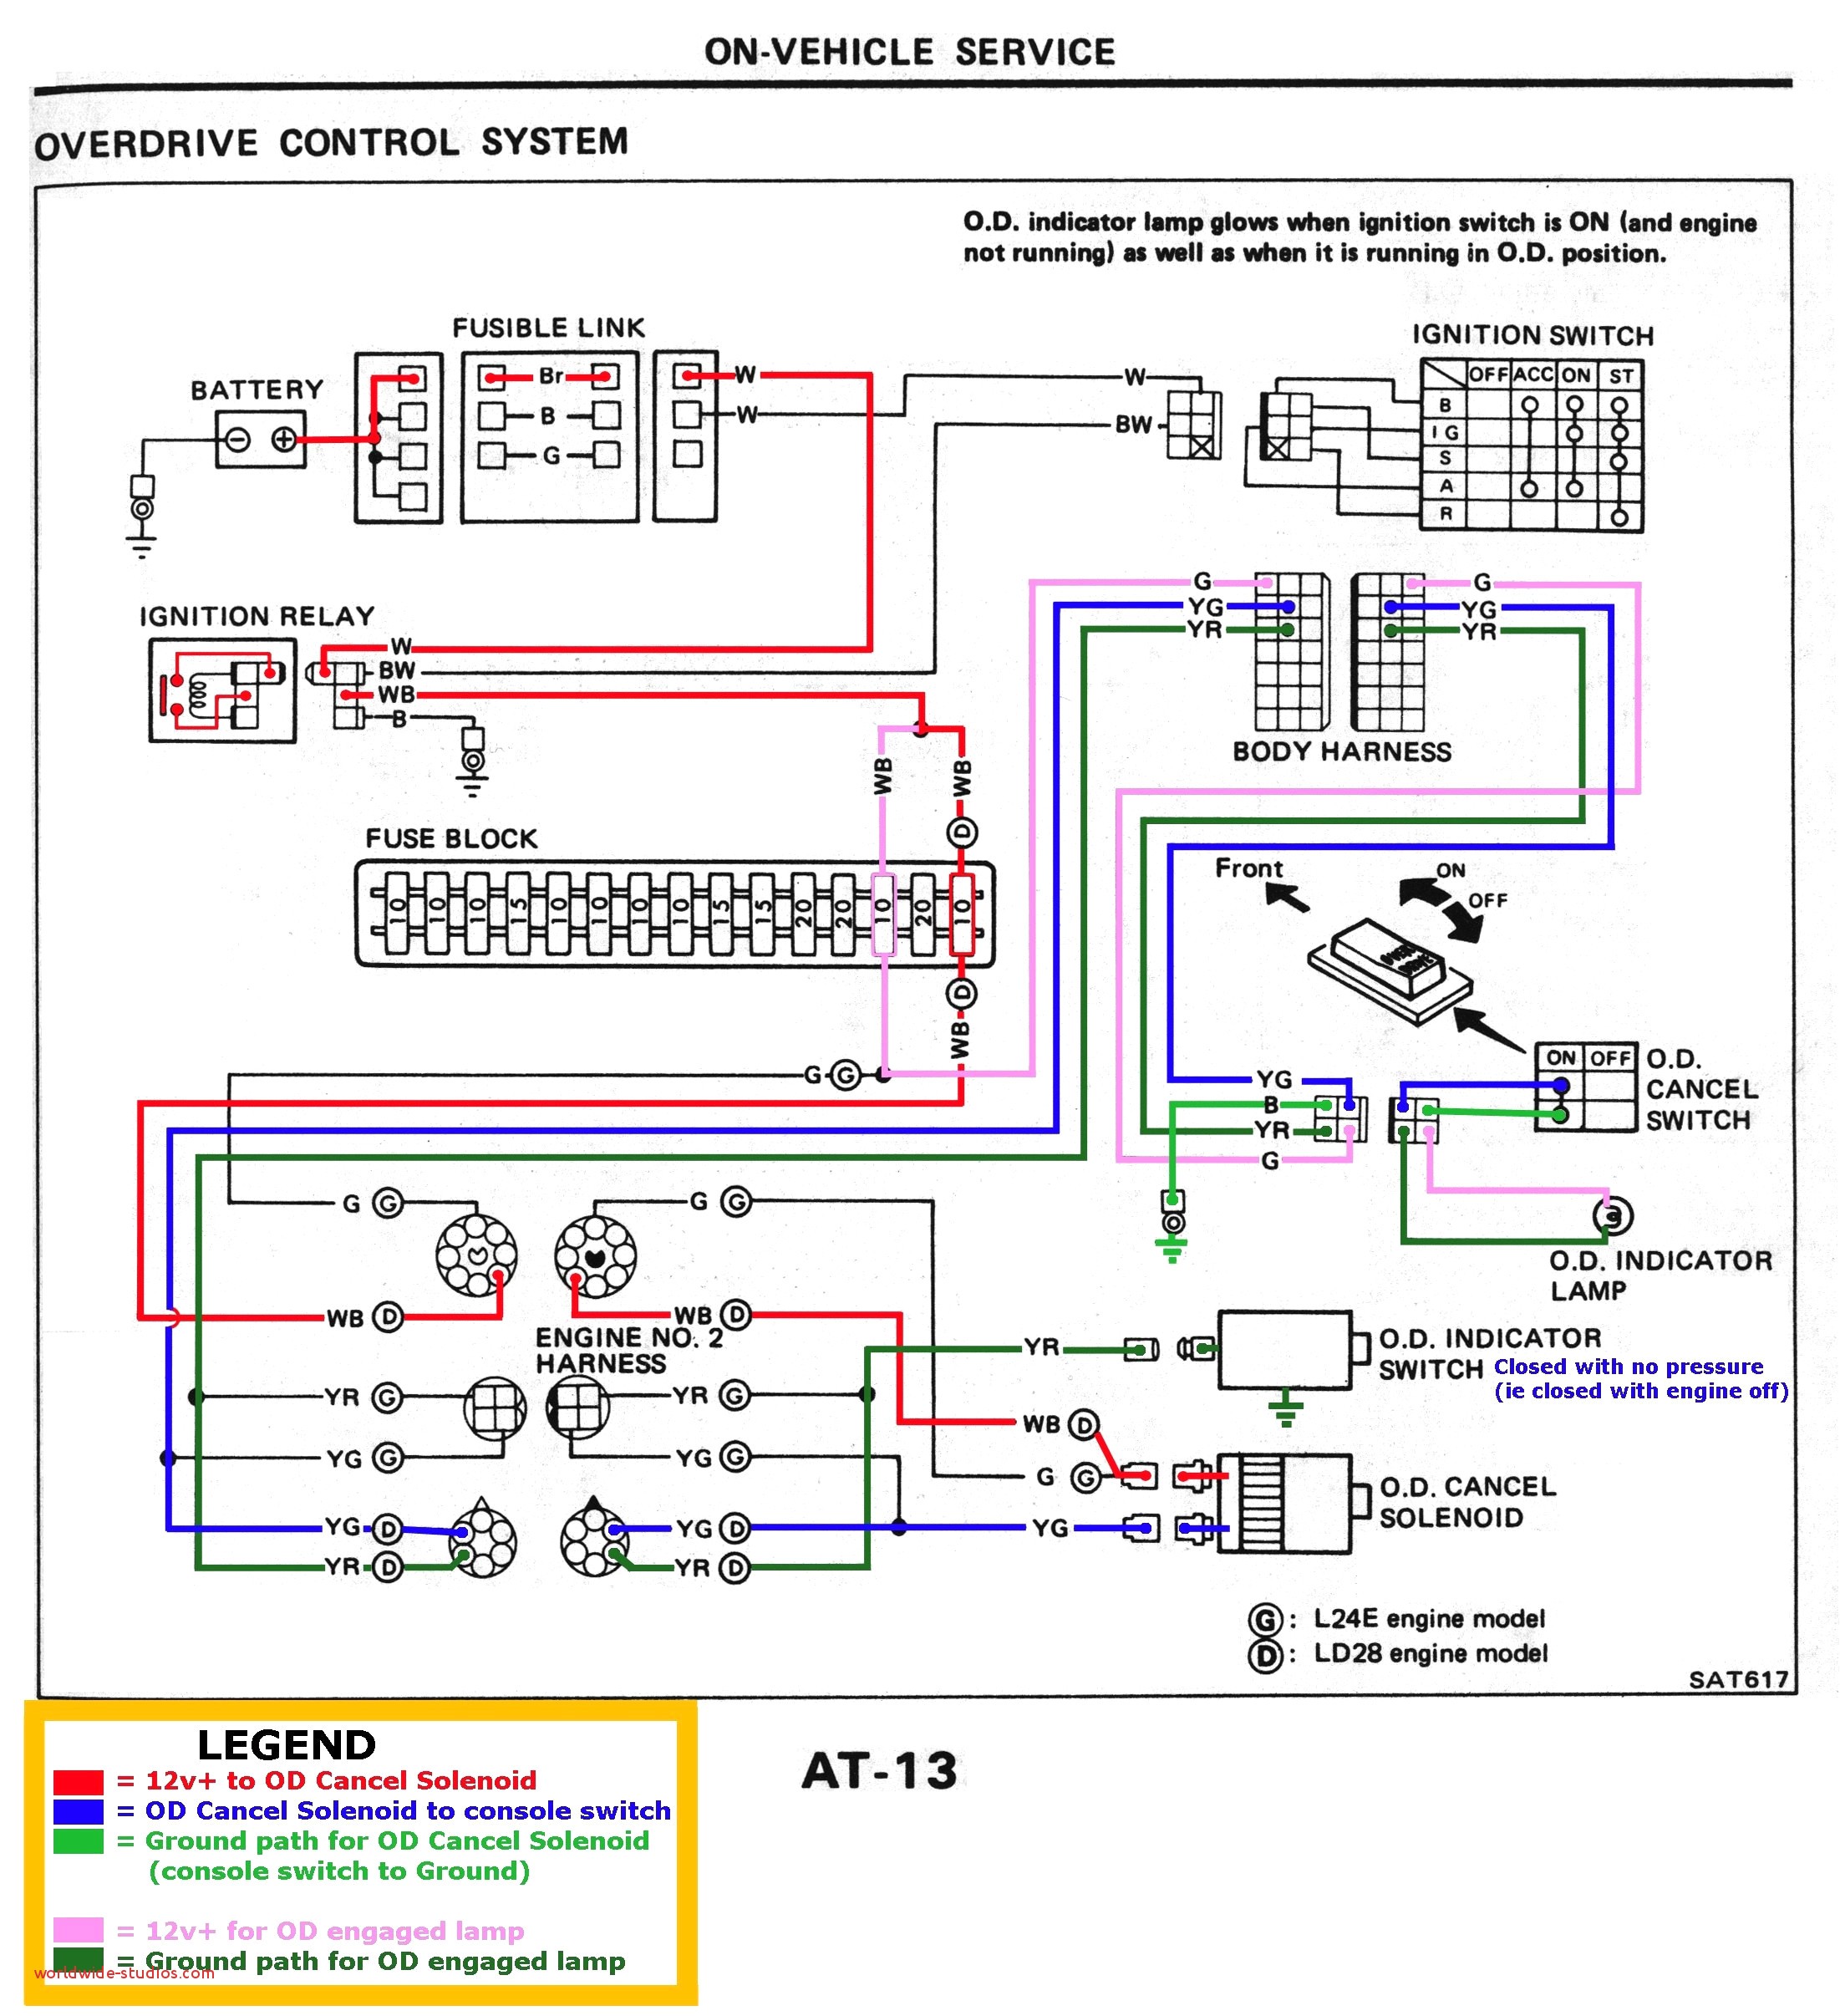 Top Result Diy Air Conditioning Kits Inspirational Wiring Diagram Window Type Air Conditioner Archives Image